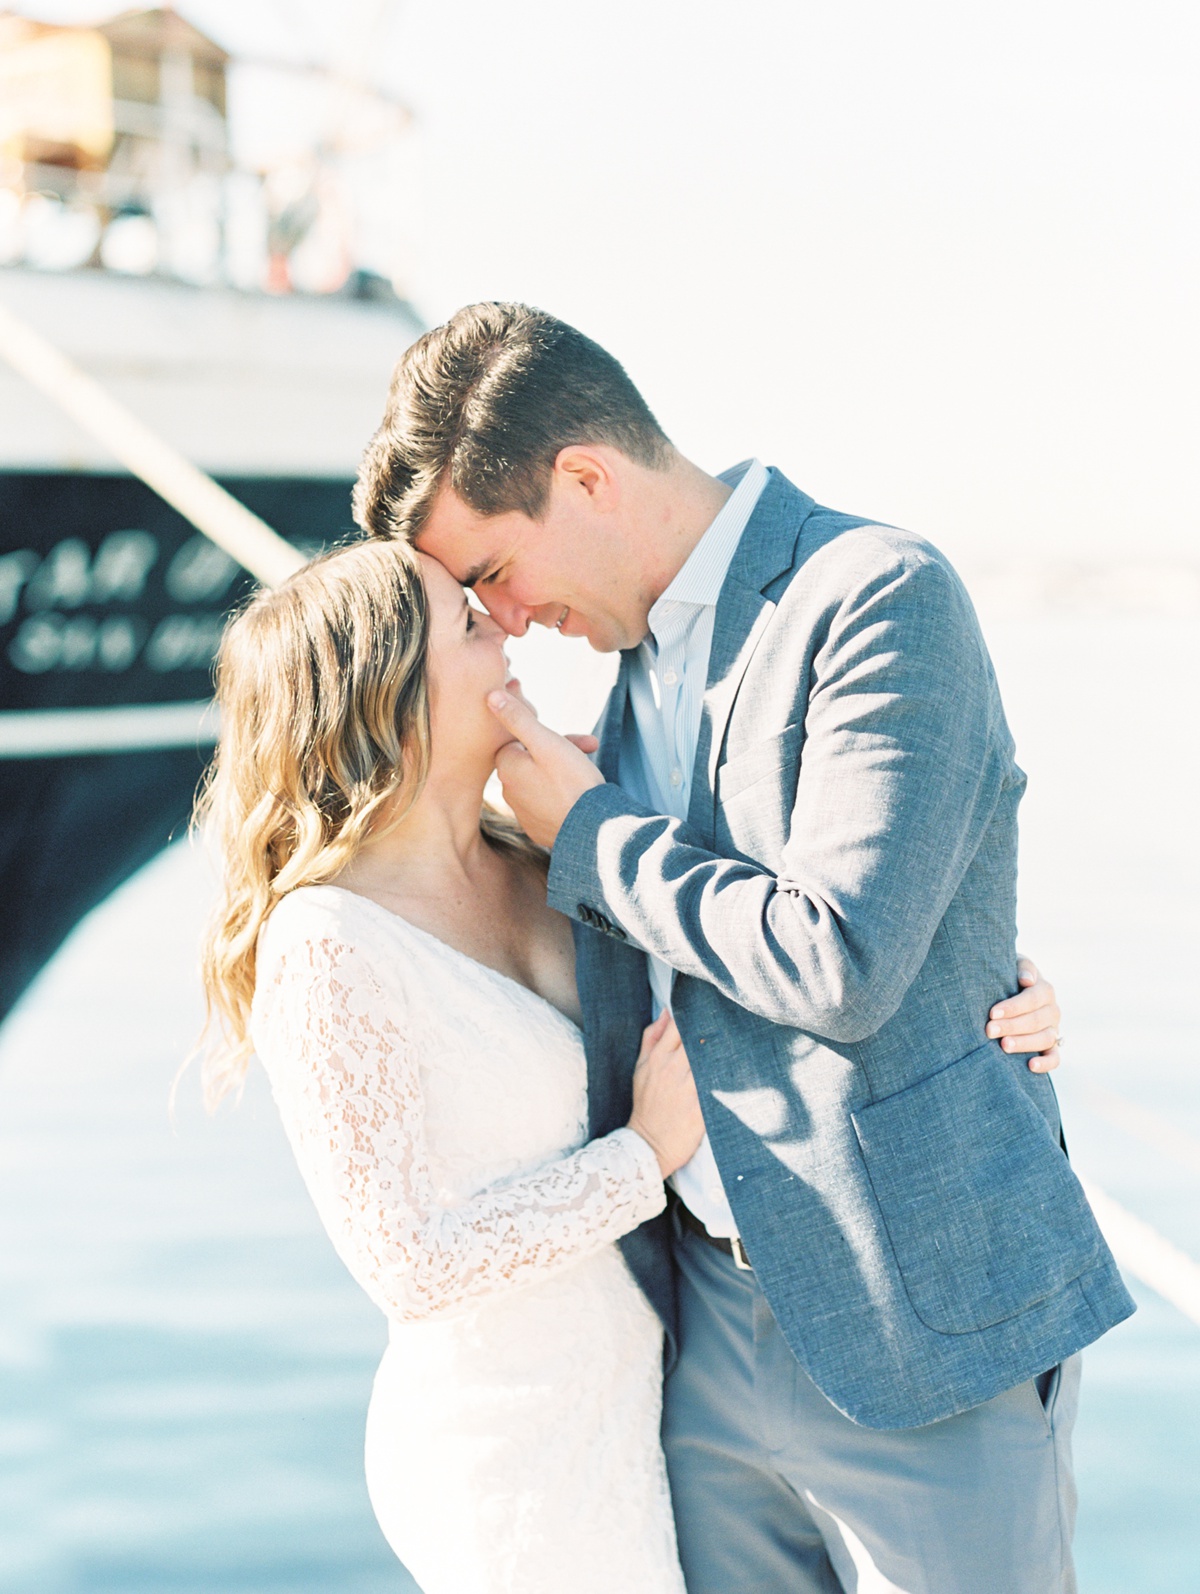 Couple Posing At The Star Of India | Downtown San Diego Bay Courthouse Wedding Shot On Film By Mandy Ford Photography